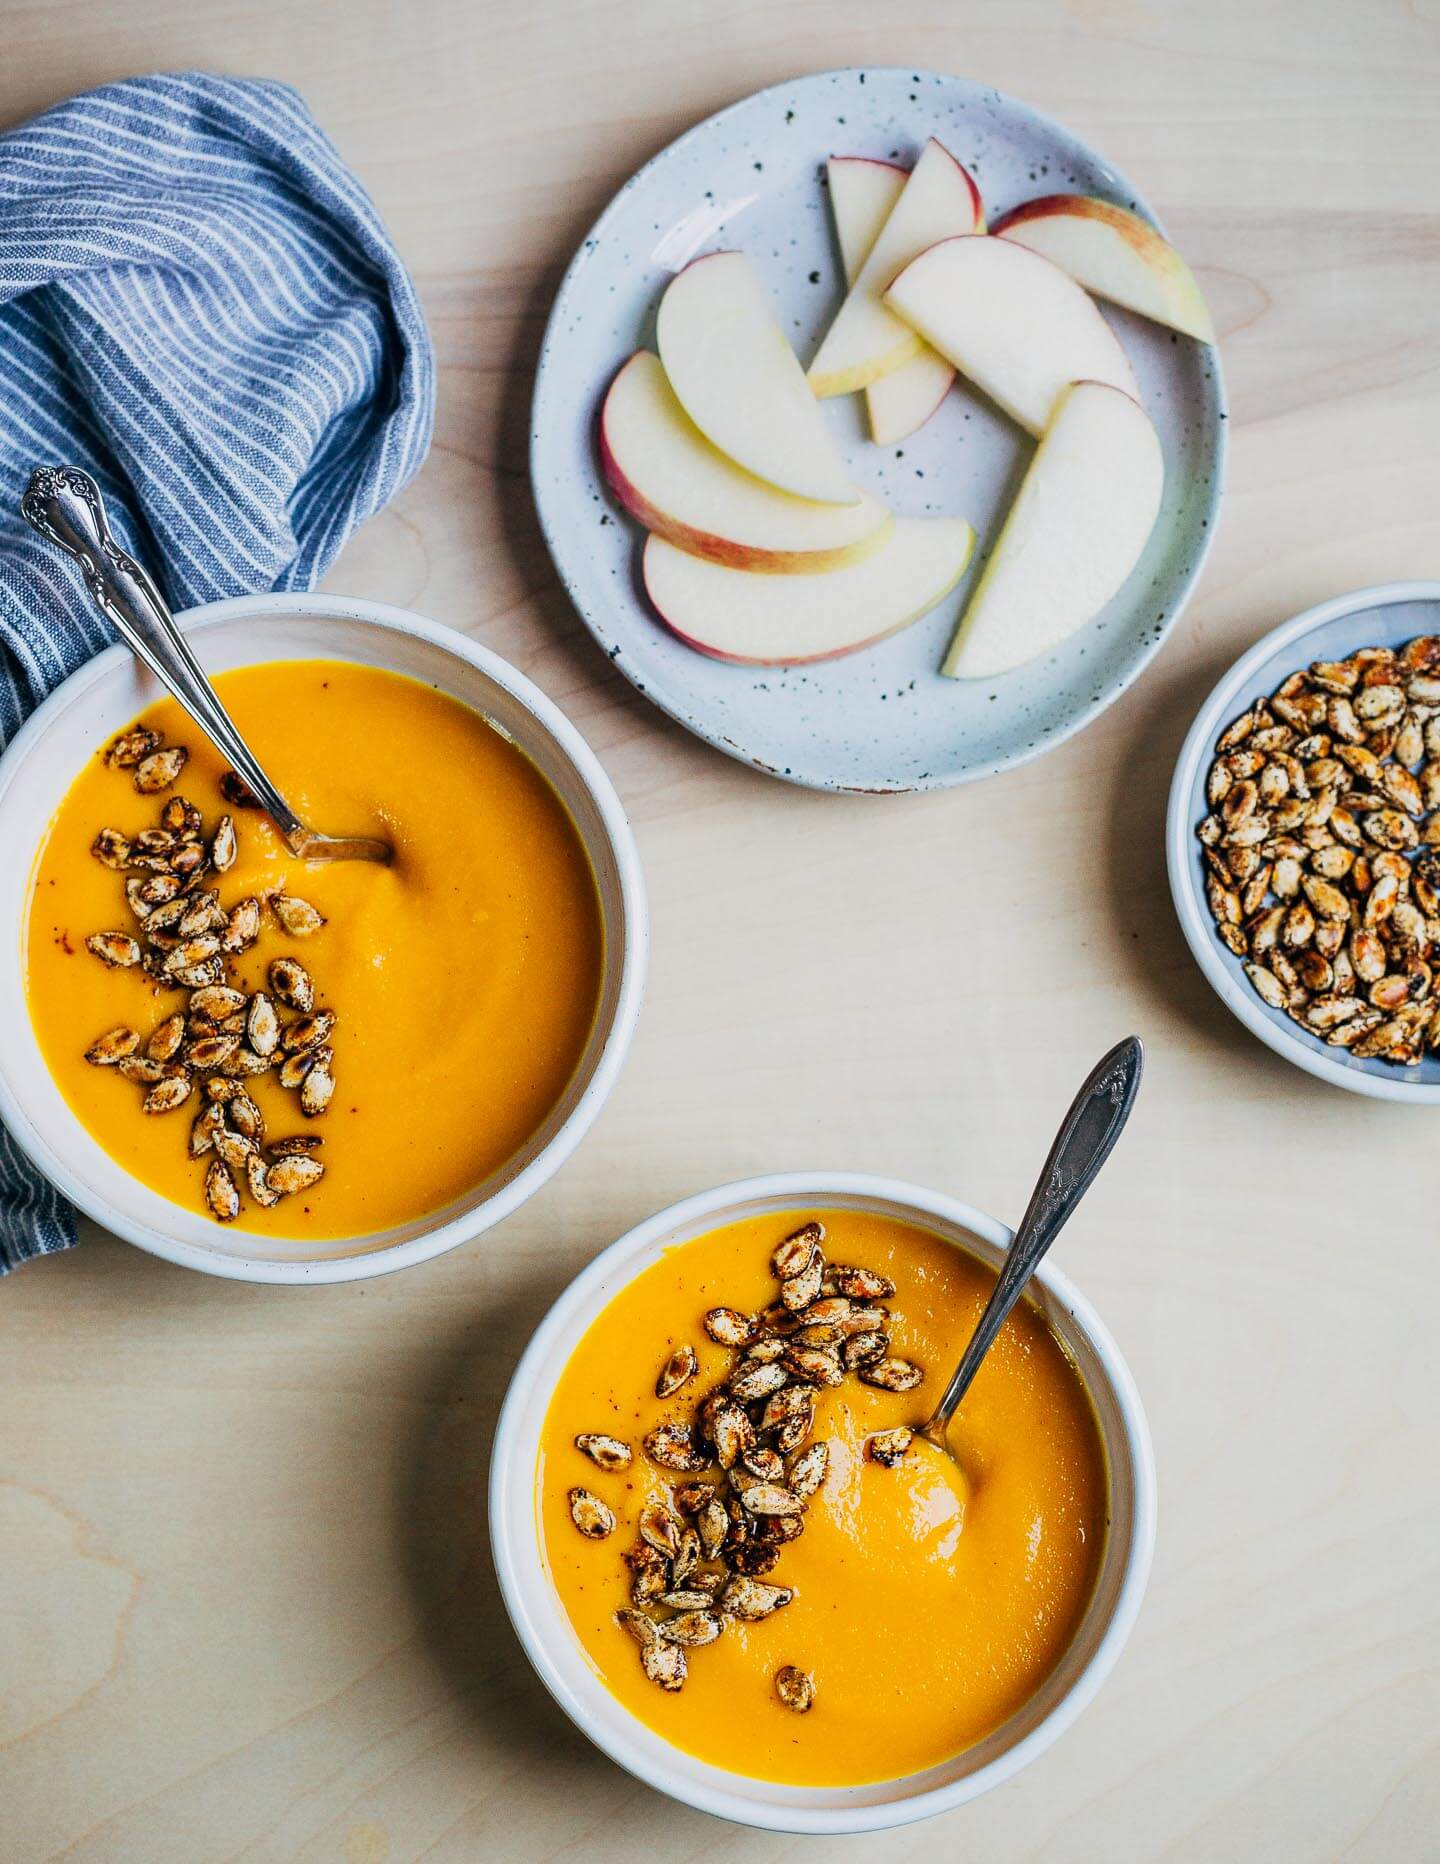 A simple vegan Honeynut squash and apple soup made with fresh ginger, tart apples, and sweet Honeynut squash (or whatever winter squash you happen to have on hand). 